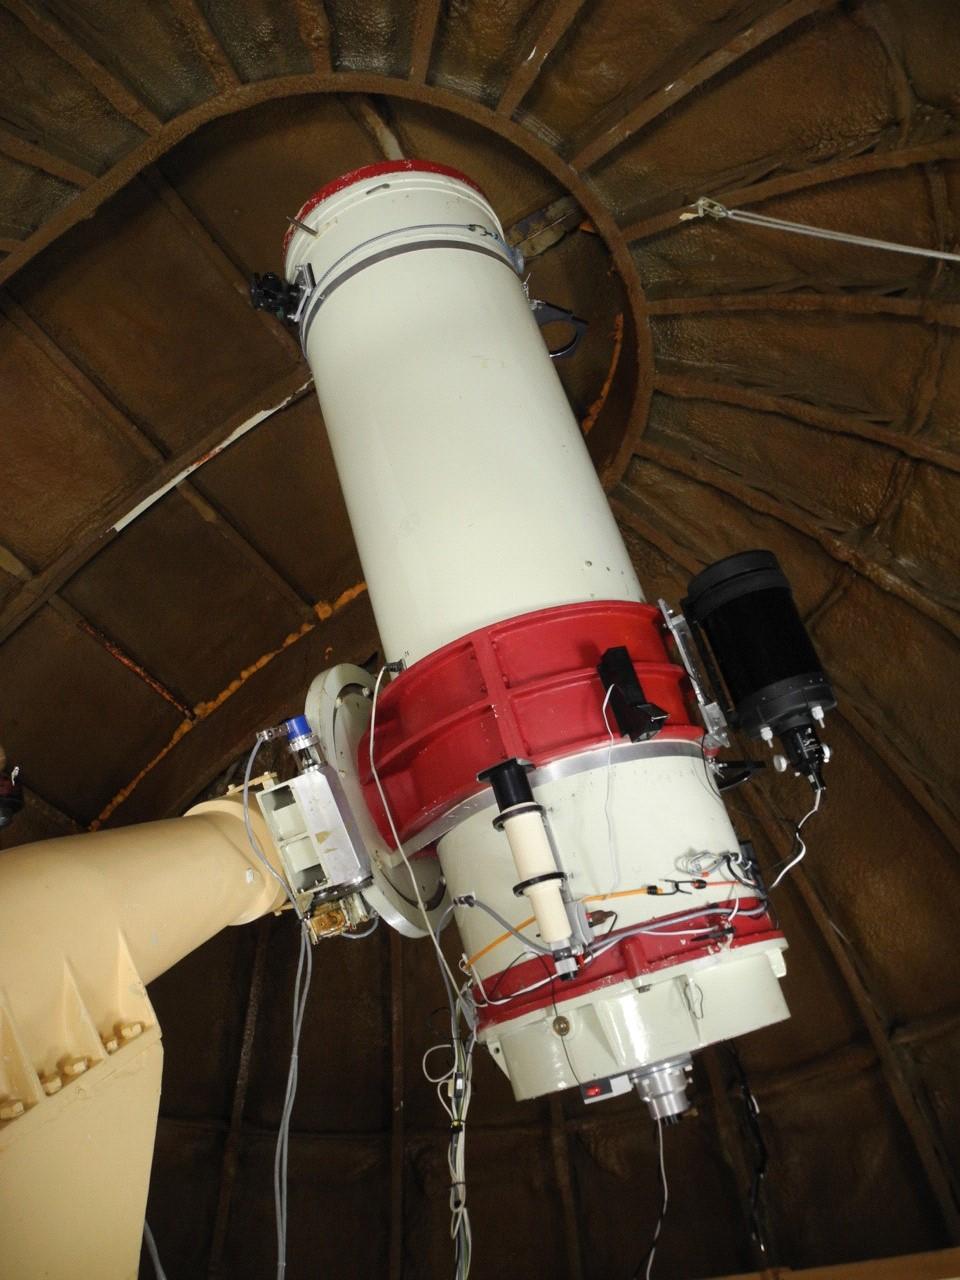 On the RC telescope (F = 4 m), two optical configurations were used : a 2x Barlow when working with the ASI290 camera, giving a resulting focal length of 8.4 m and a plate scale of of 0.